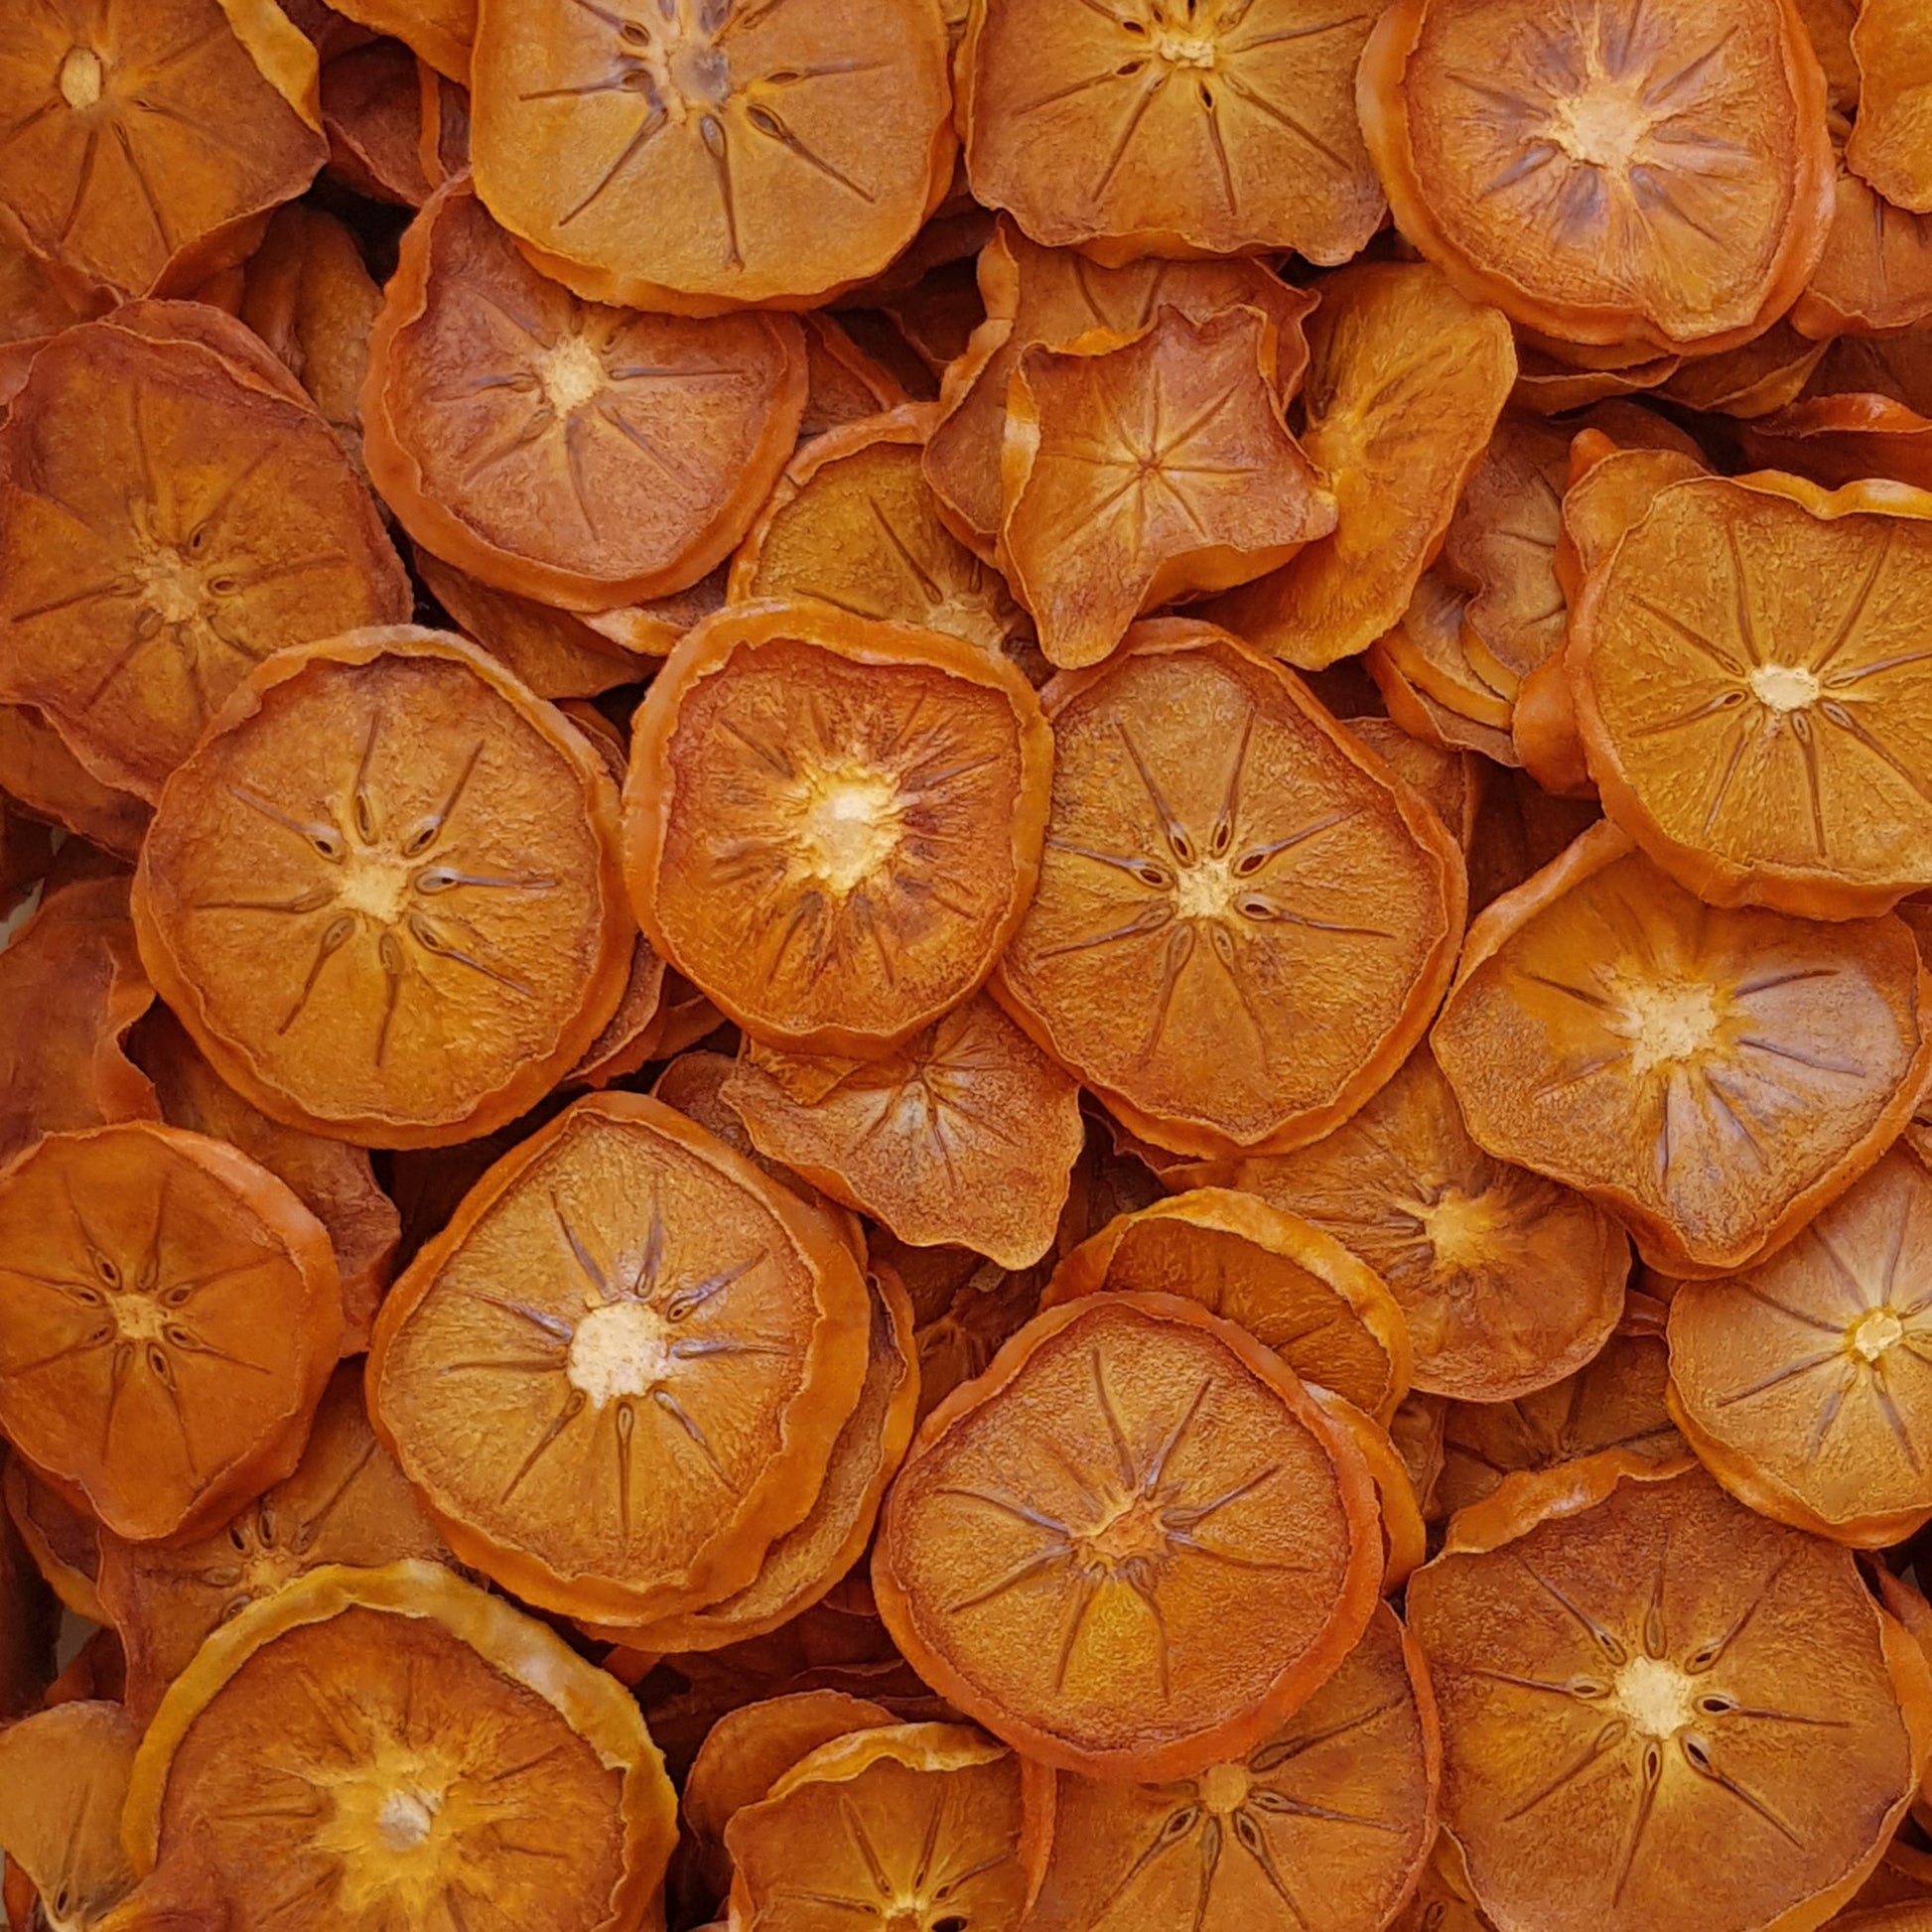 Full frame overhead image of BY NATURE Dried Persimmon Rings - preservative-free.